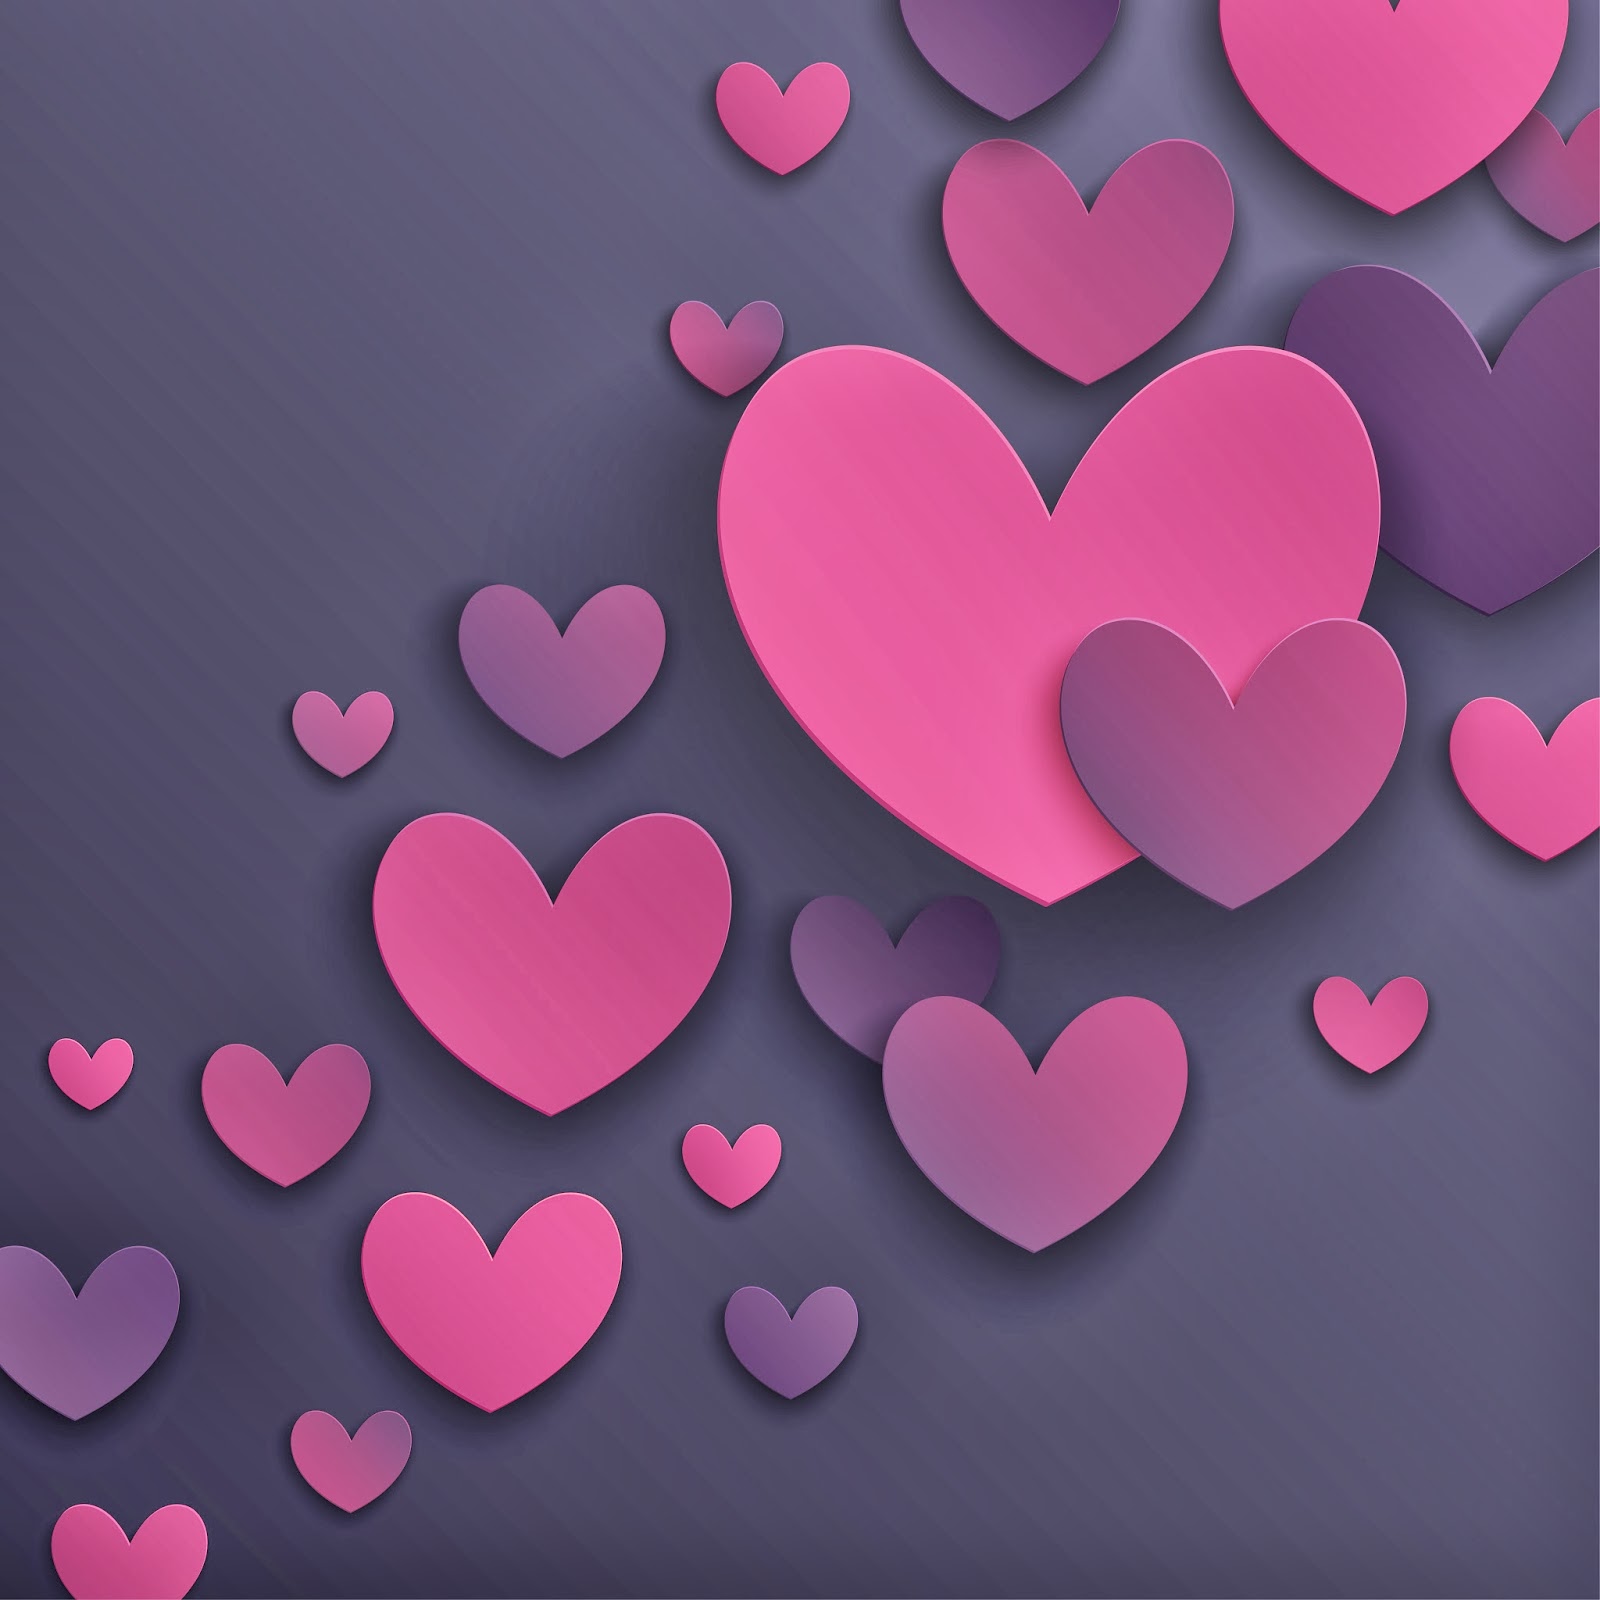 Valentine Day 2015 Hearts Wallpaper Most Popular Wallpapers